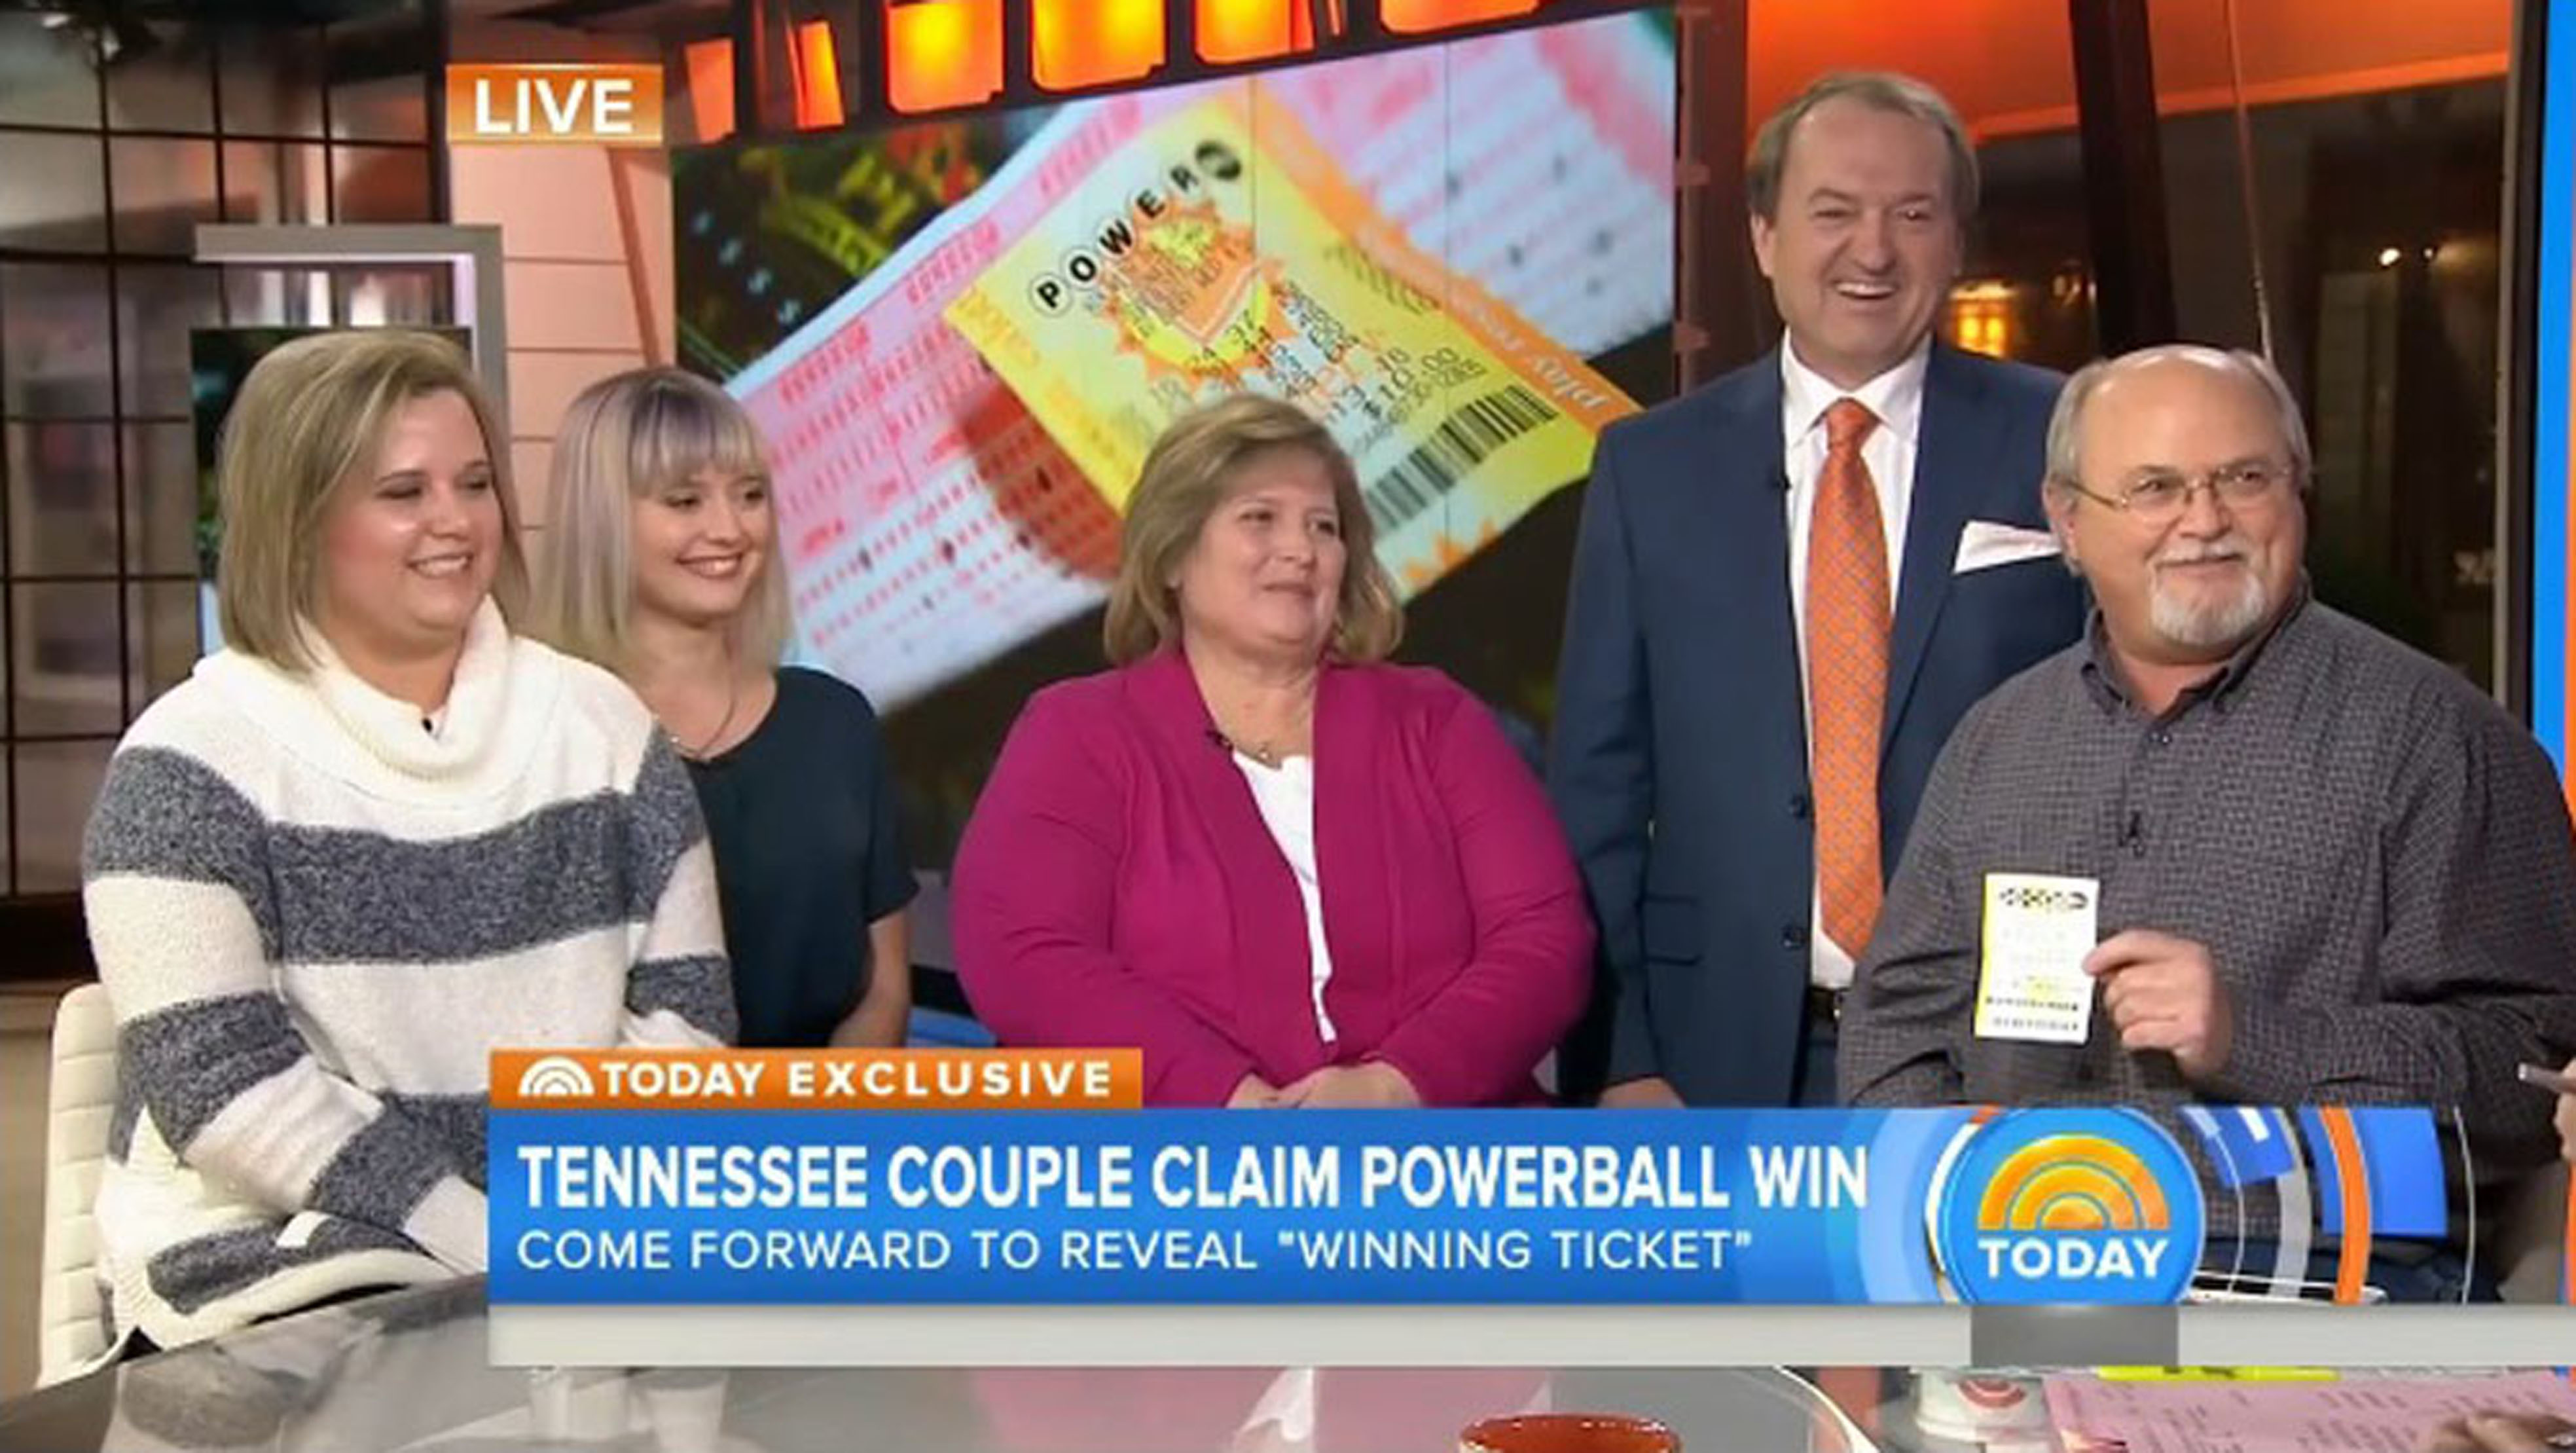 Tenn. family claims they have winning Powerball ticket (Video)